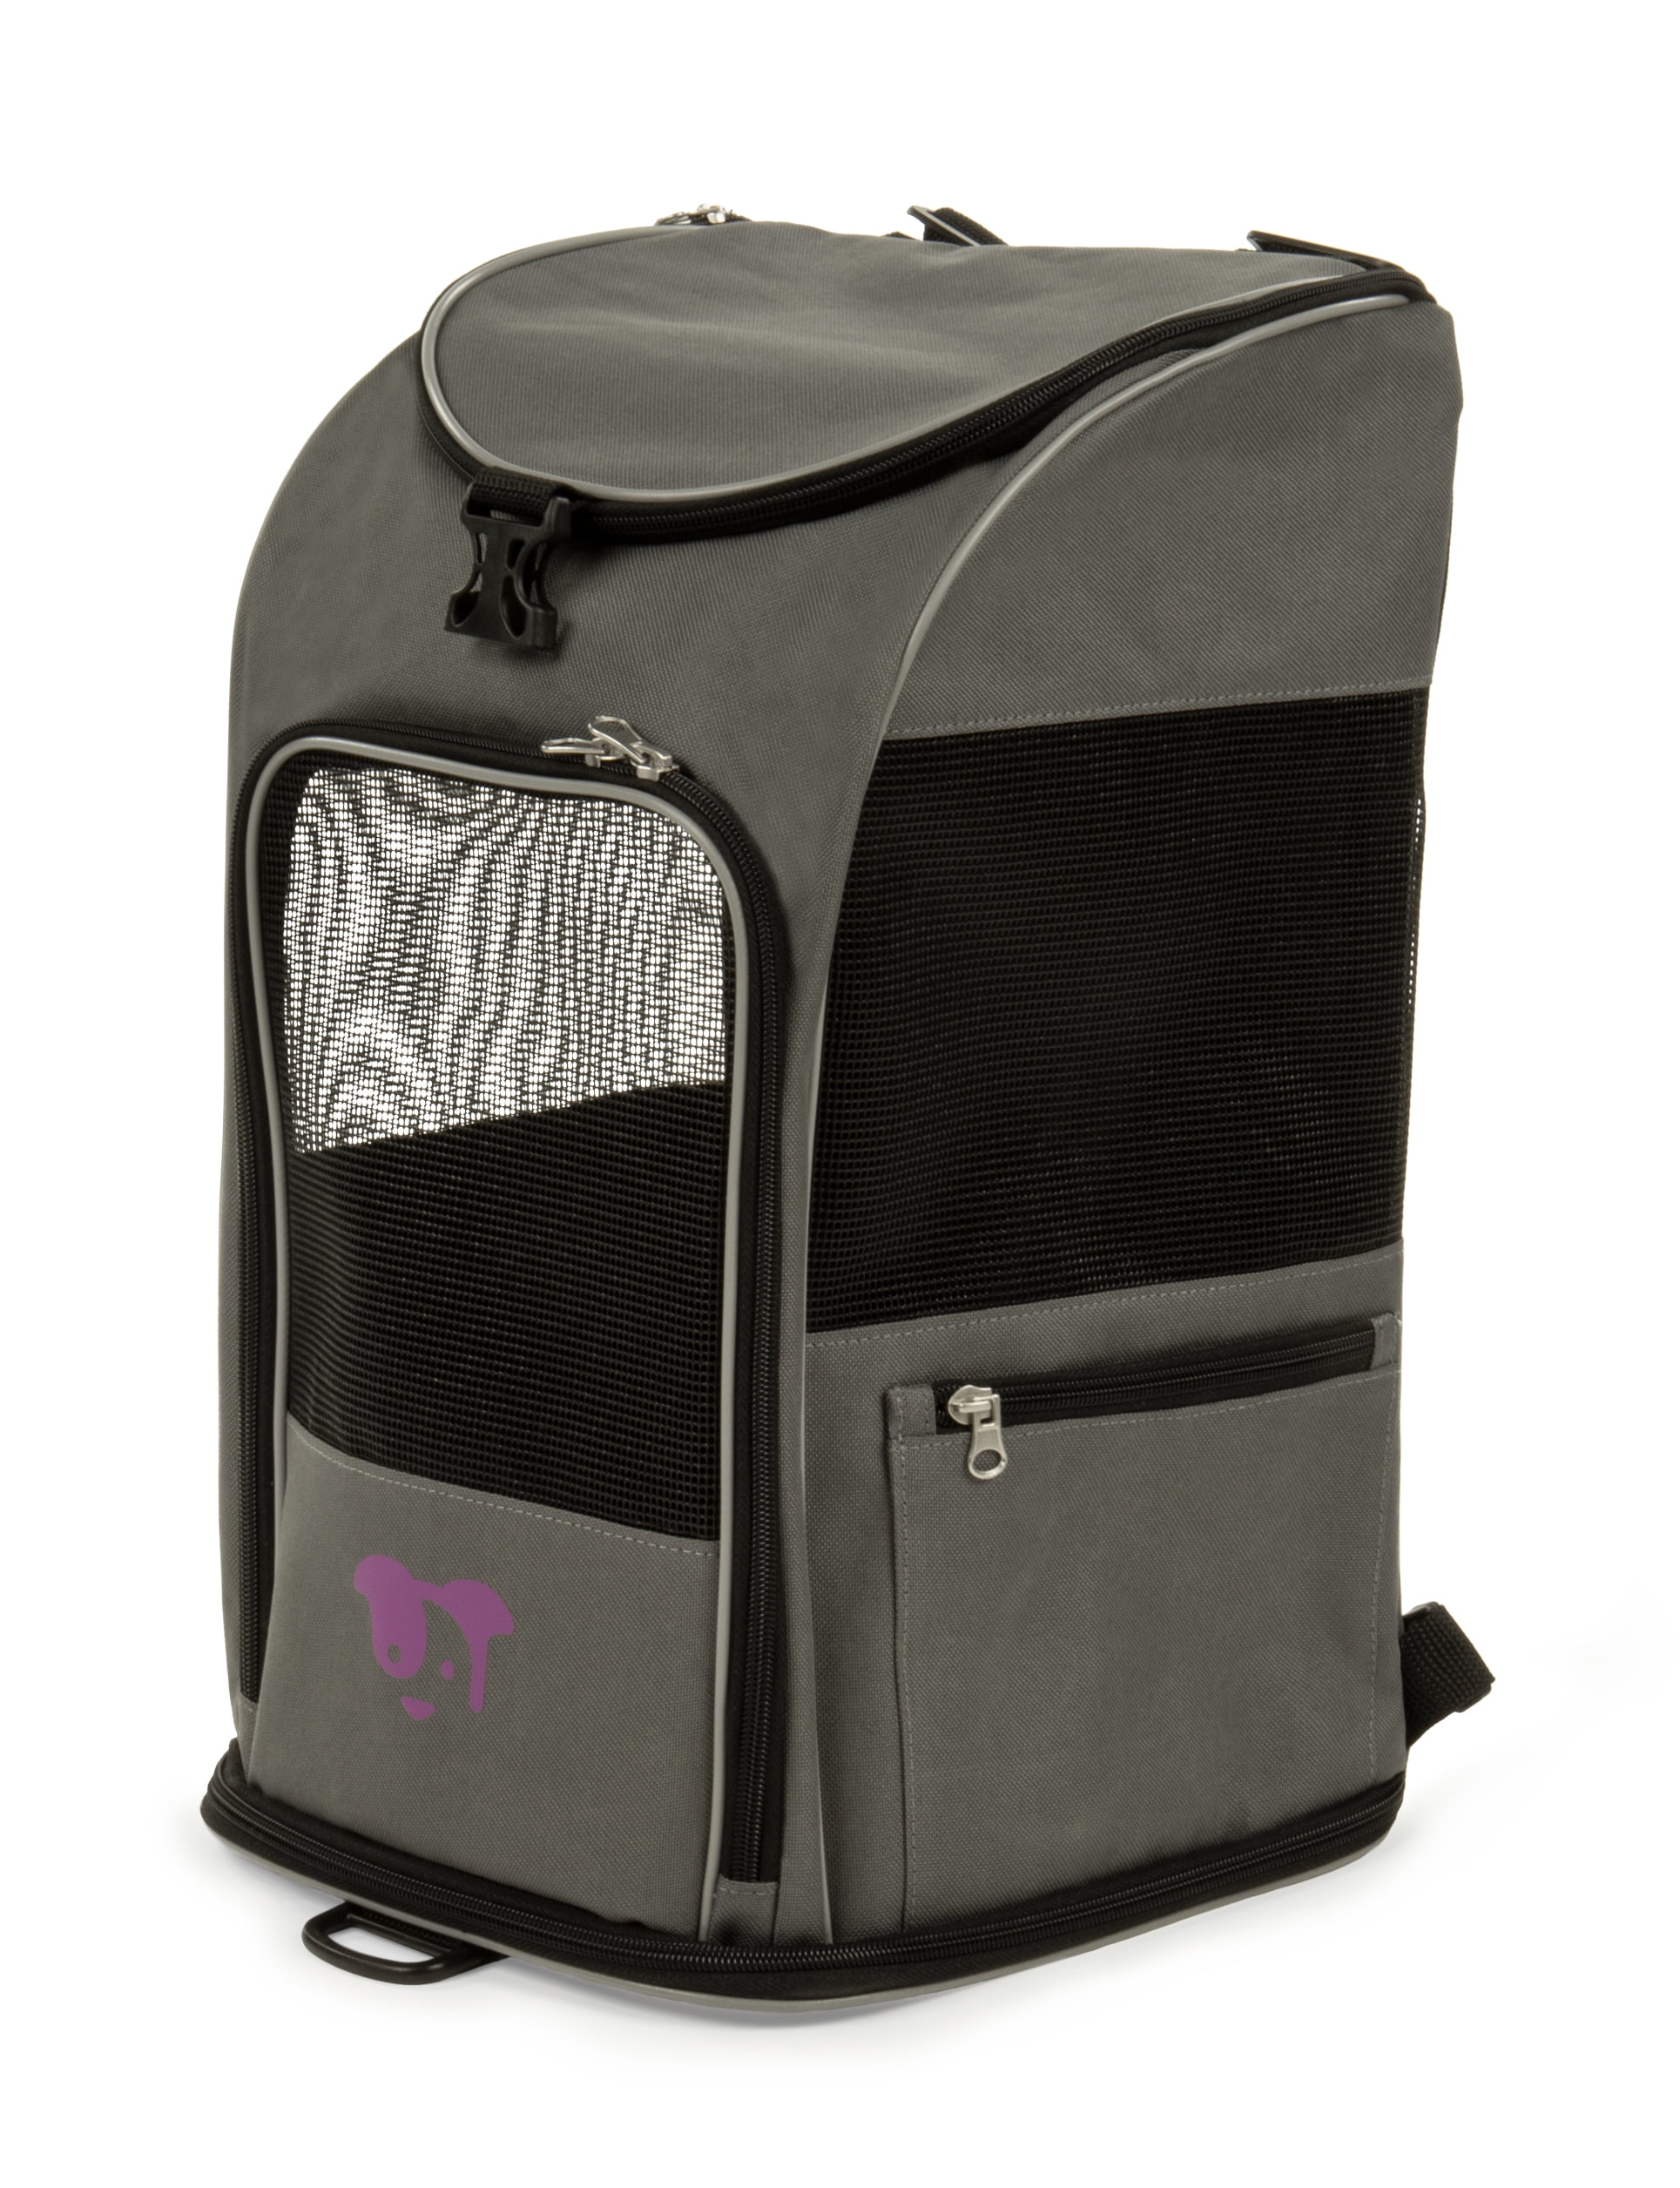 The 5 Best Airline-Approved Cat Carriers of 2024, Tested and Reviewed